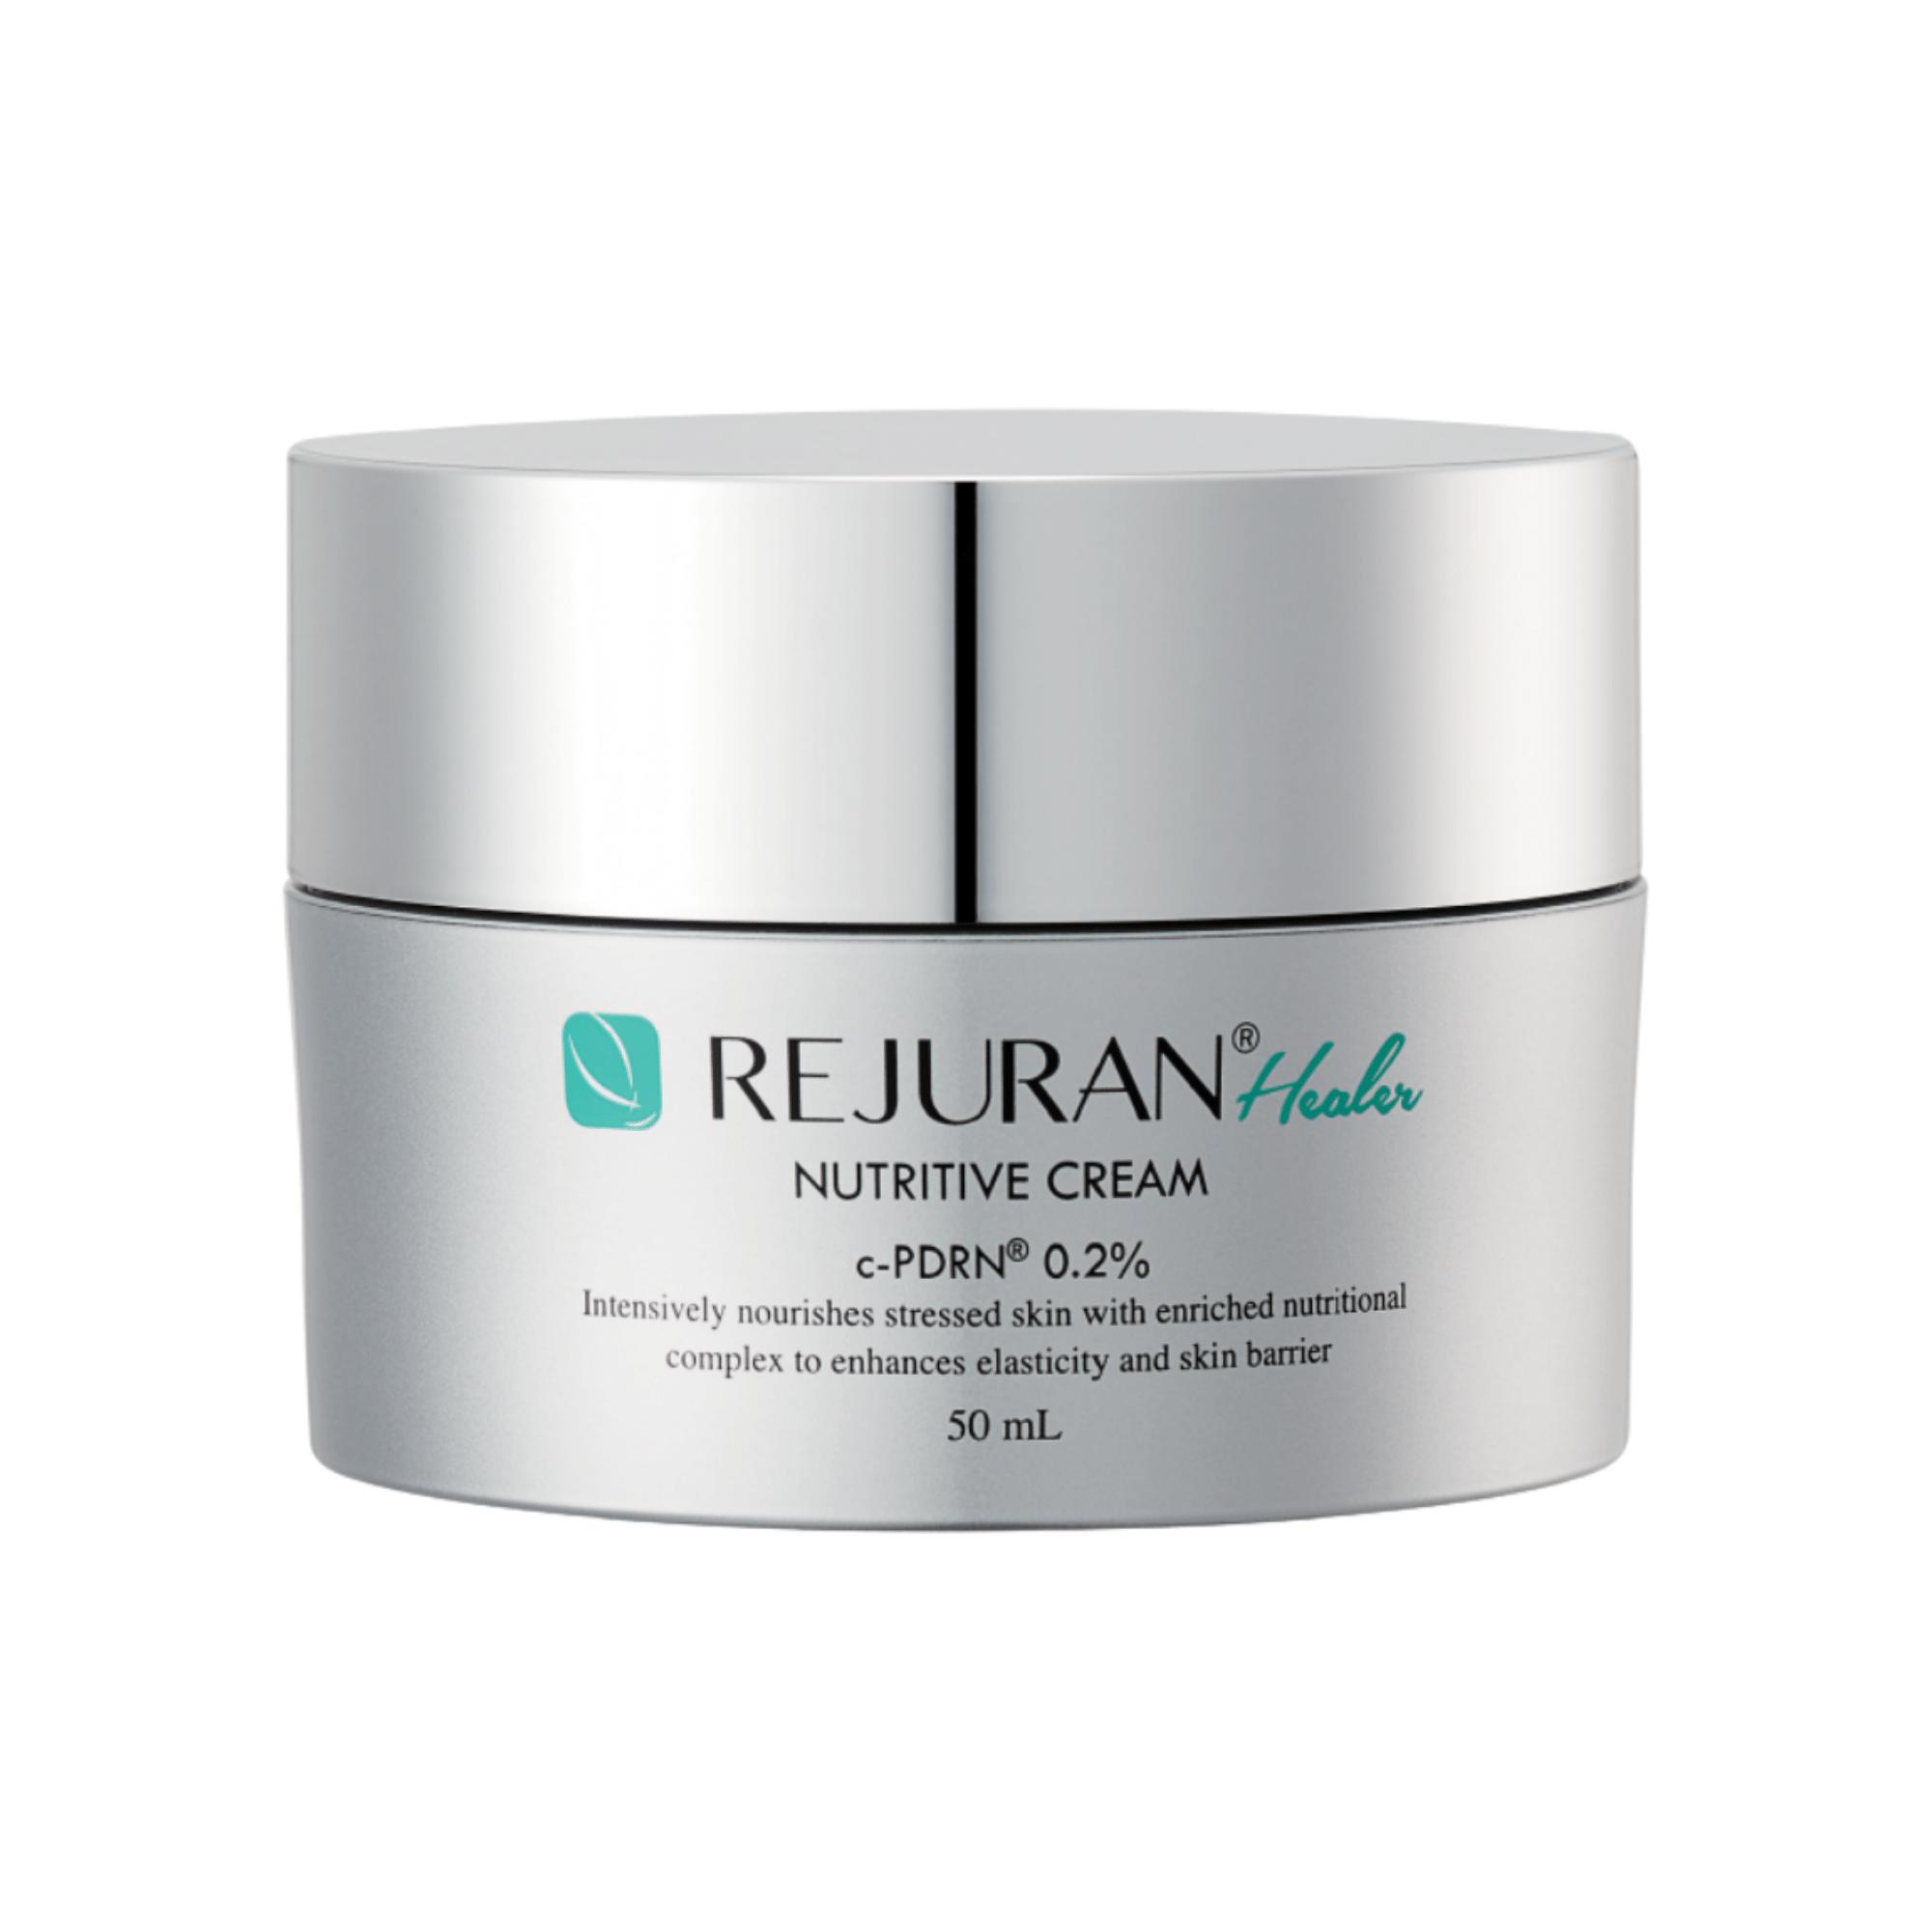 rejuran malaysia nutritive cream helps visibly heal and renew dry, damaged skin with restorative moisture and nutrients while soothing and revitalizing your complexion for glowing, younger-looking skin